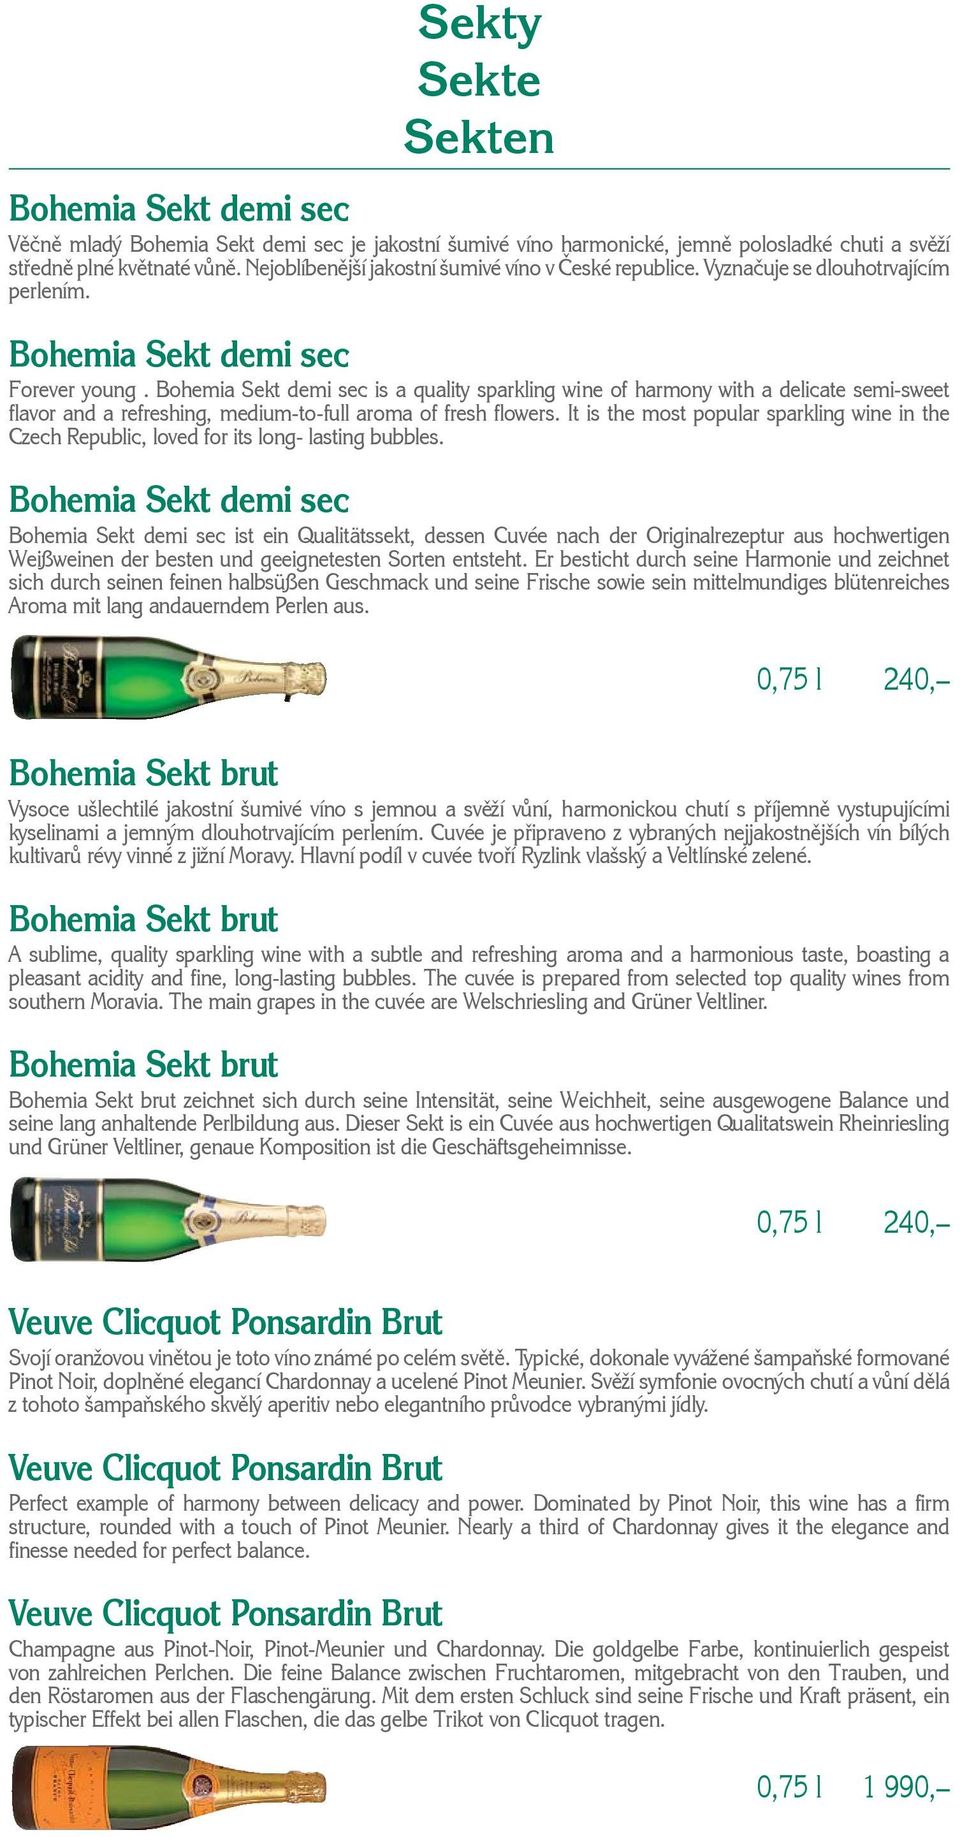 Bohemia Sekt demi sec is a quality sparkling wine of harmony with a delicate semi-sweet flavor and a refreshing, medium-to-full aroma of fresh flowers.